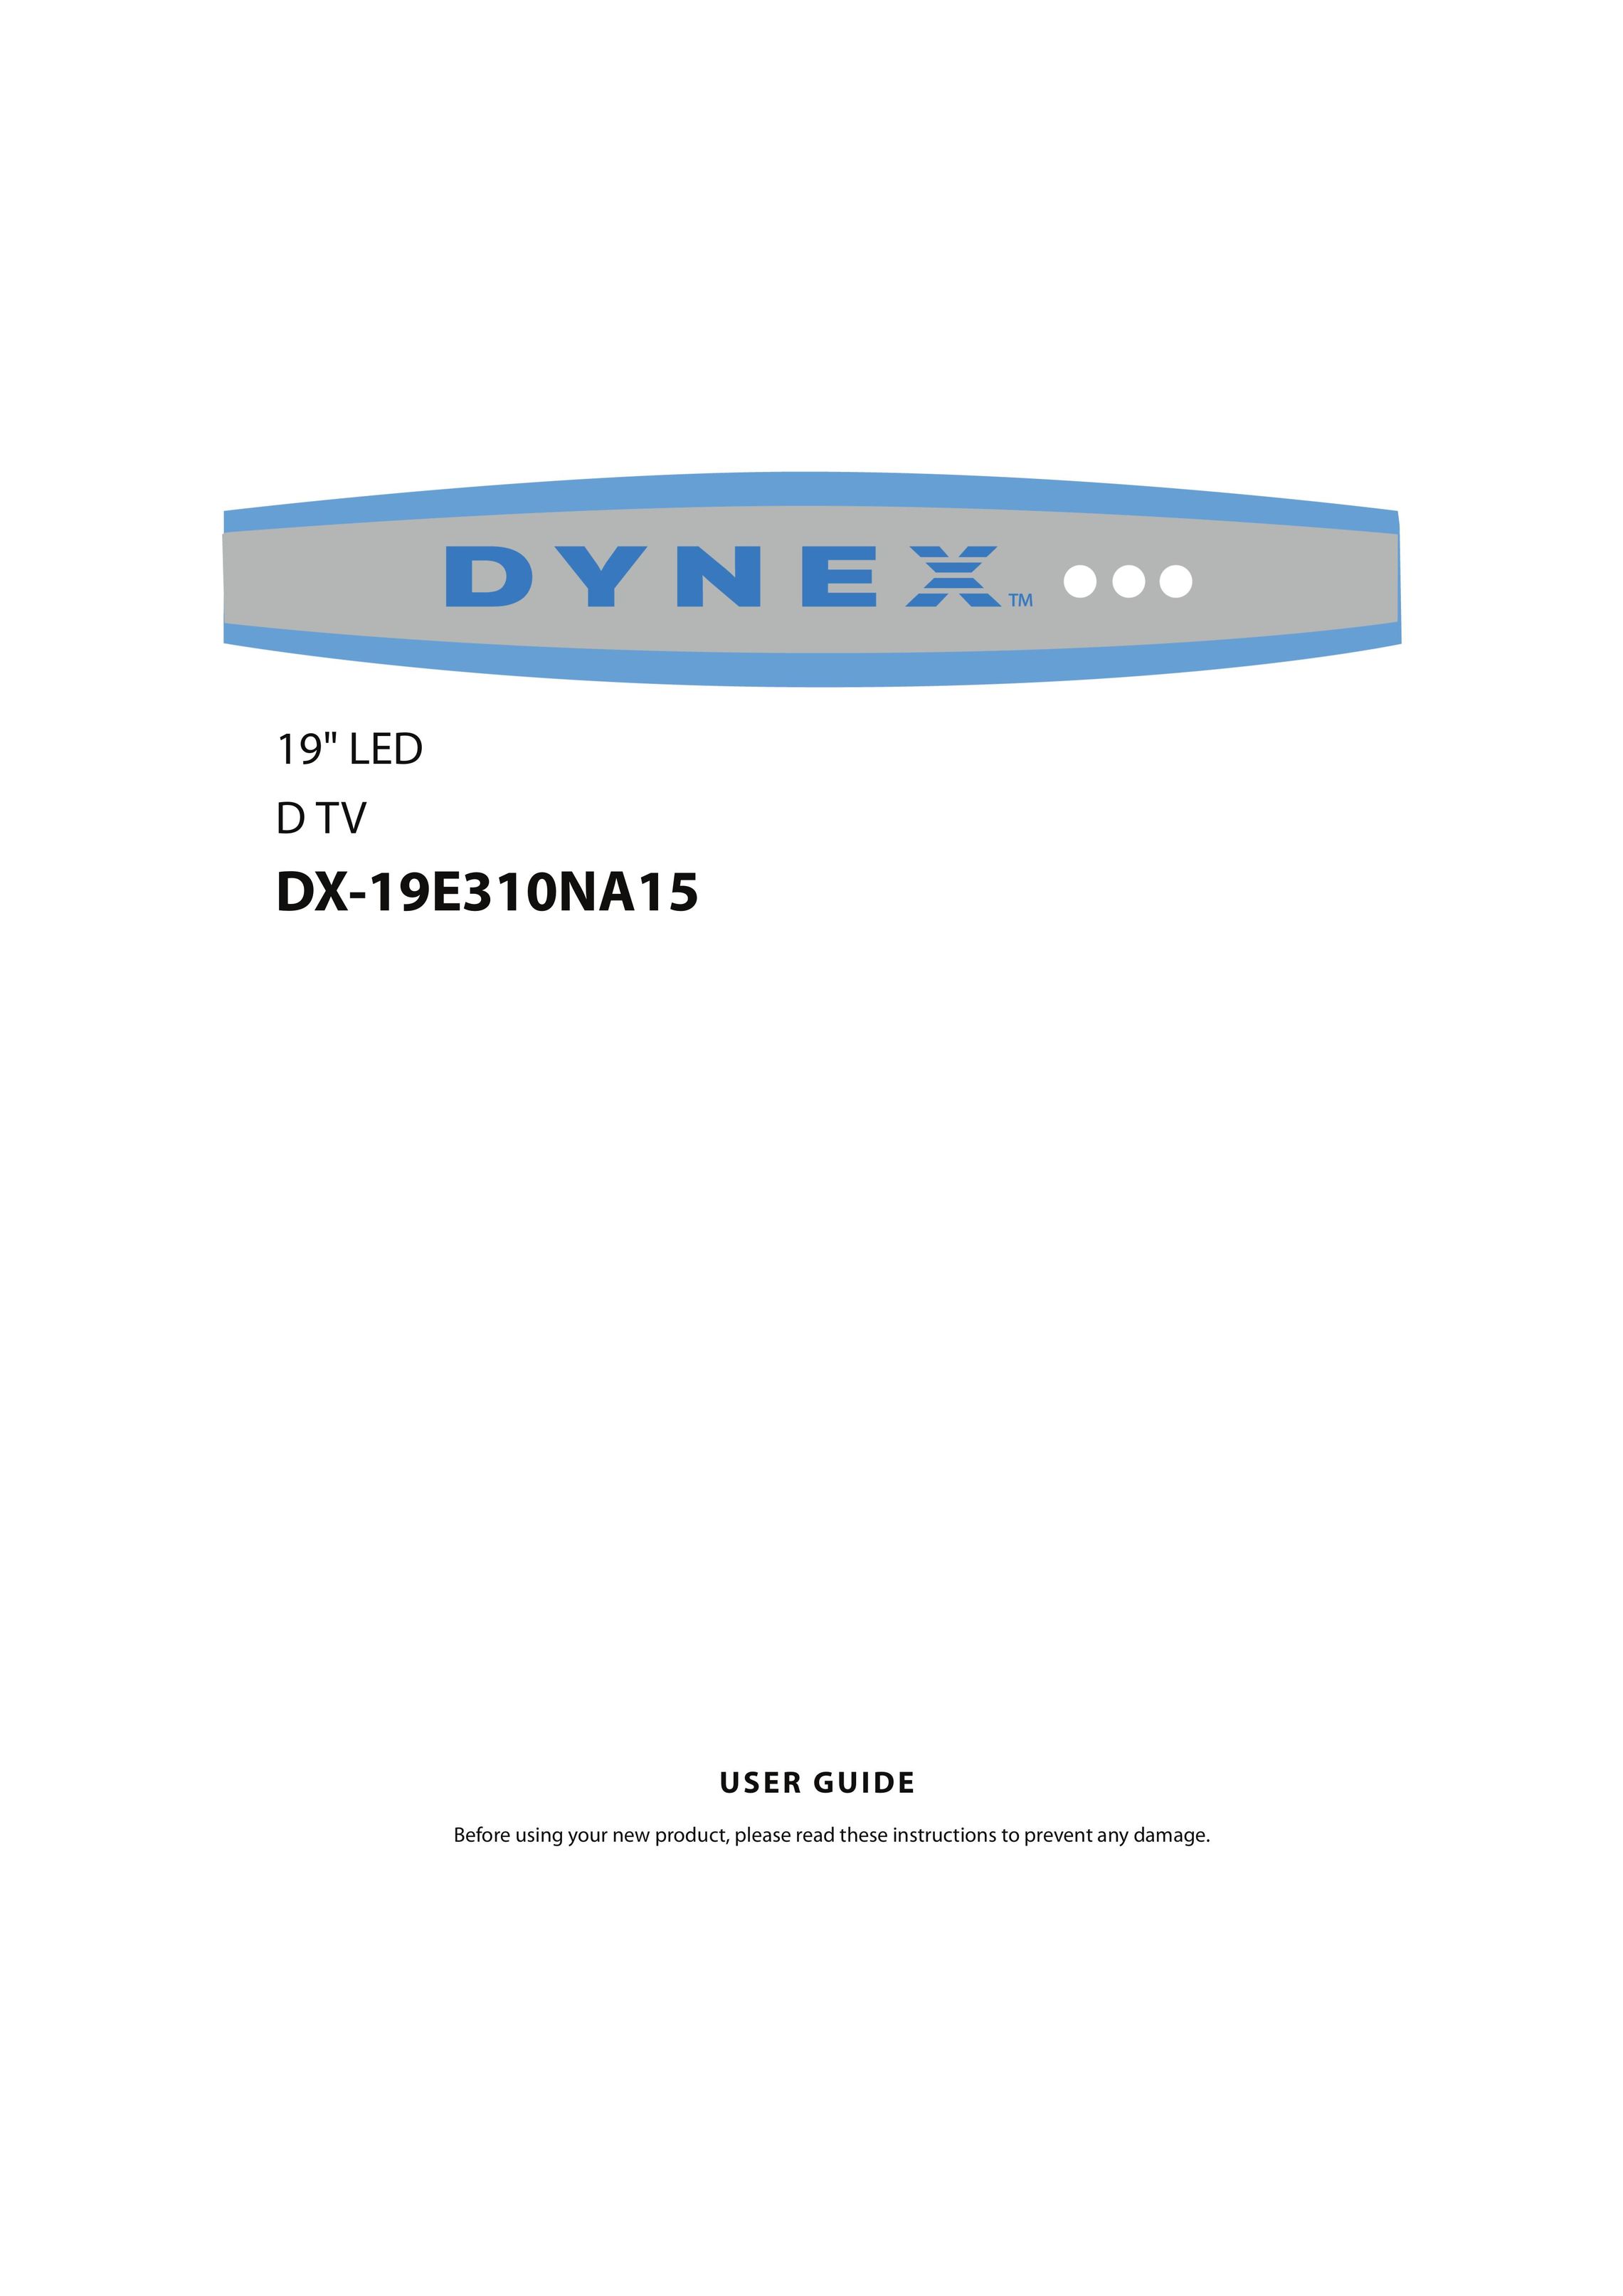 Dynex DX-19E310NA15 Flat Panel Television User Manual (Page 1)